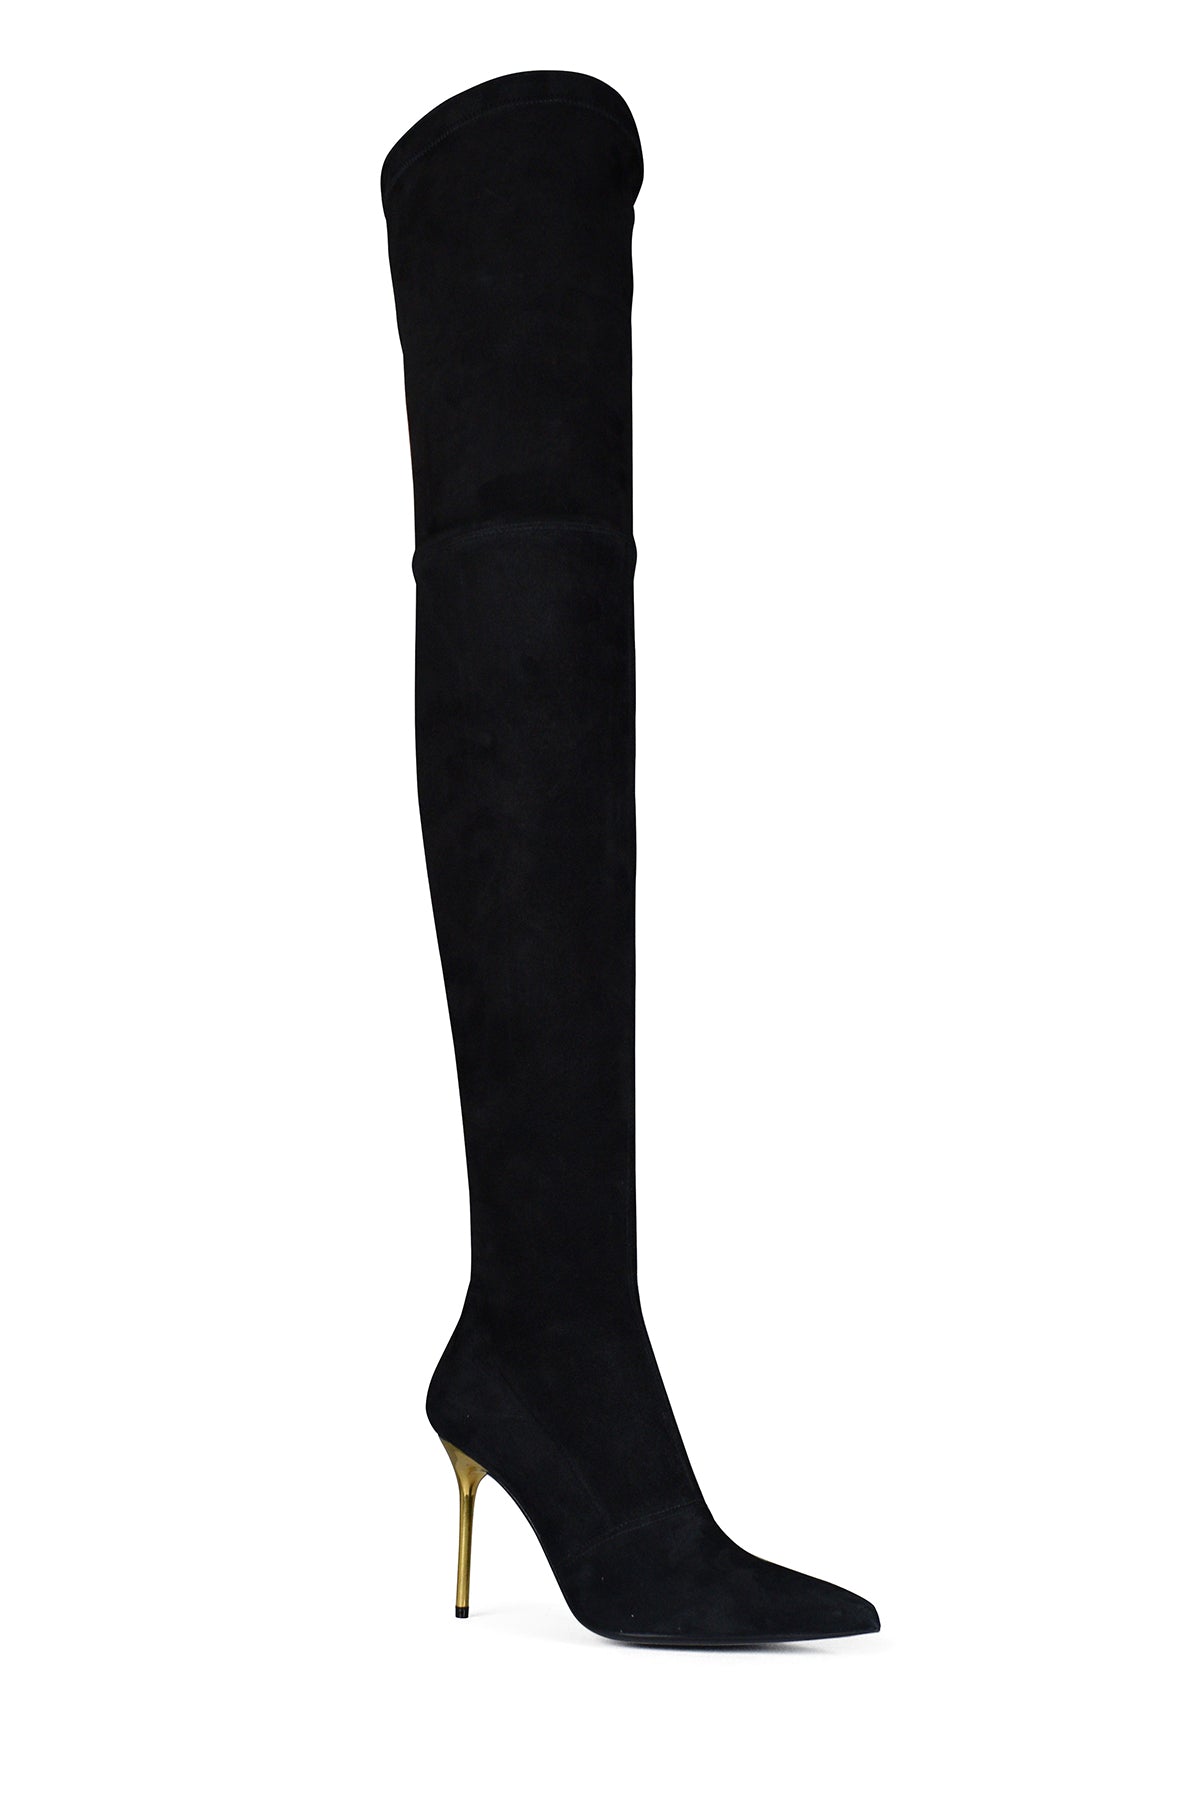 Black Suede Over-The-Knee Boots - 7